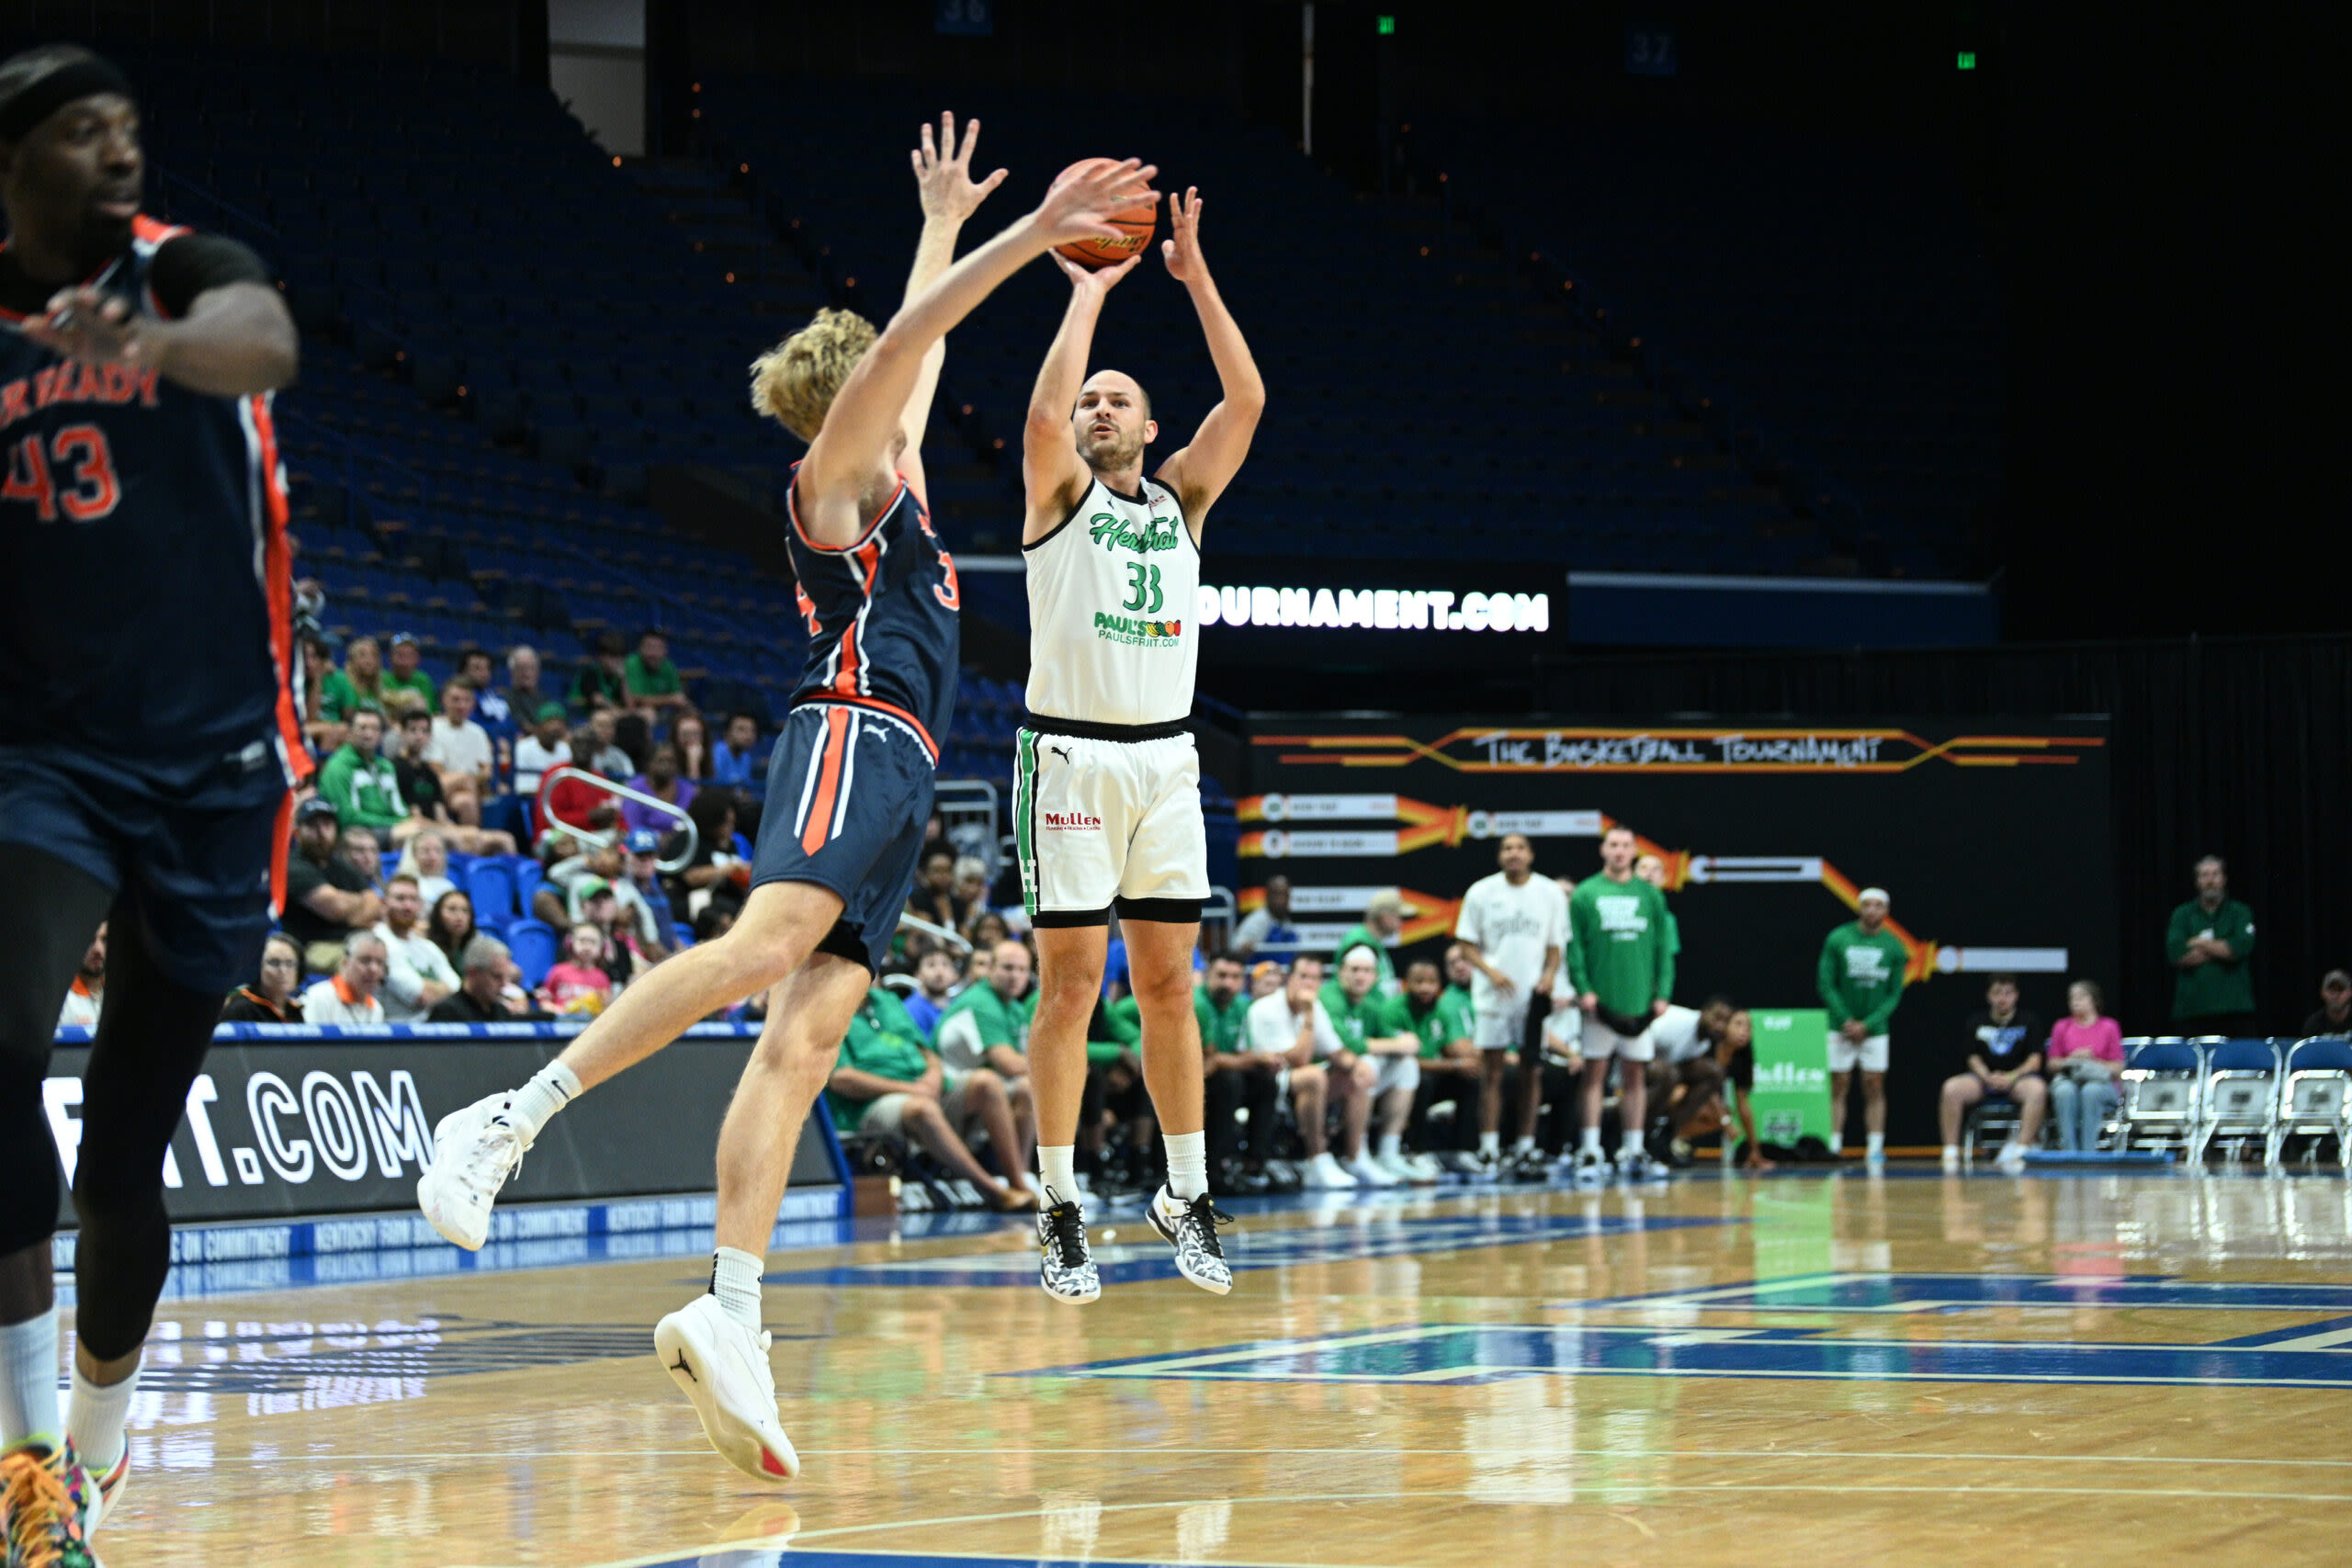 Herd That scores final 14 points to storm past War Ready, 63-59 - WV MetroNews